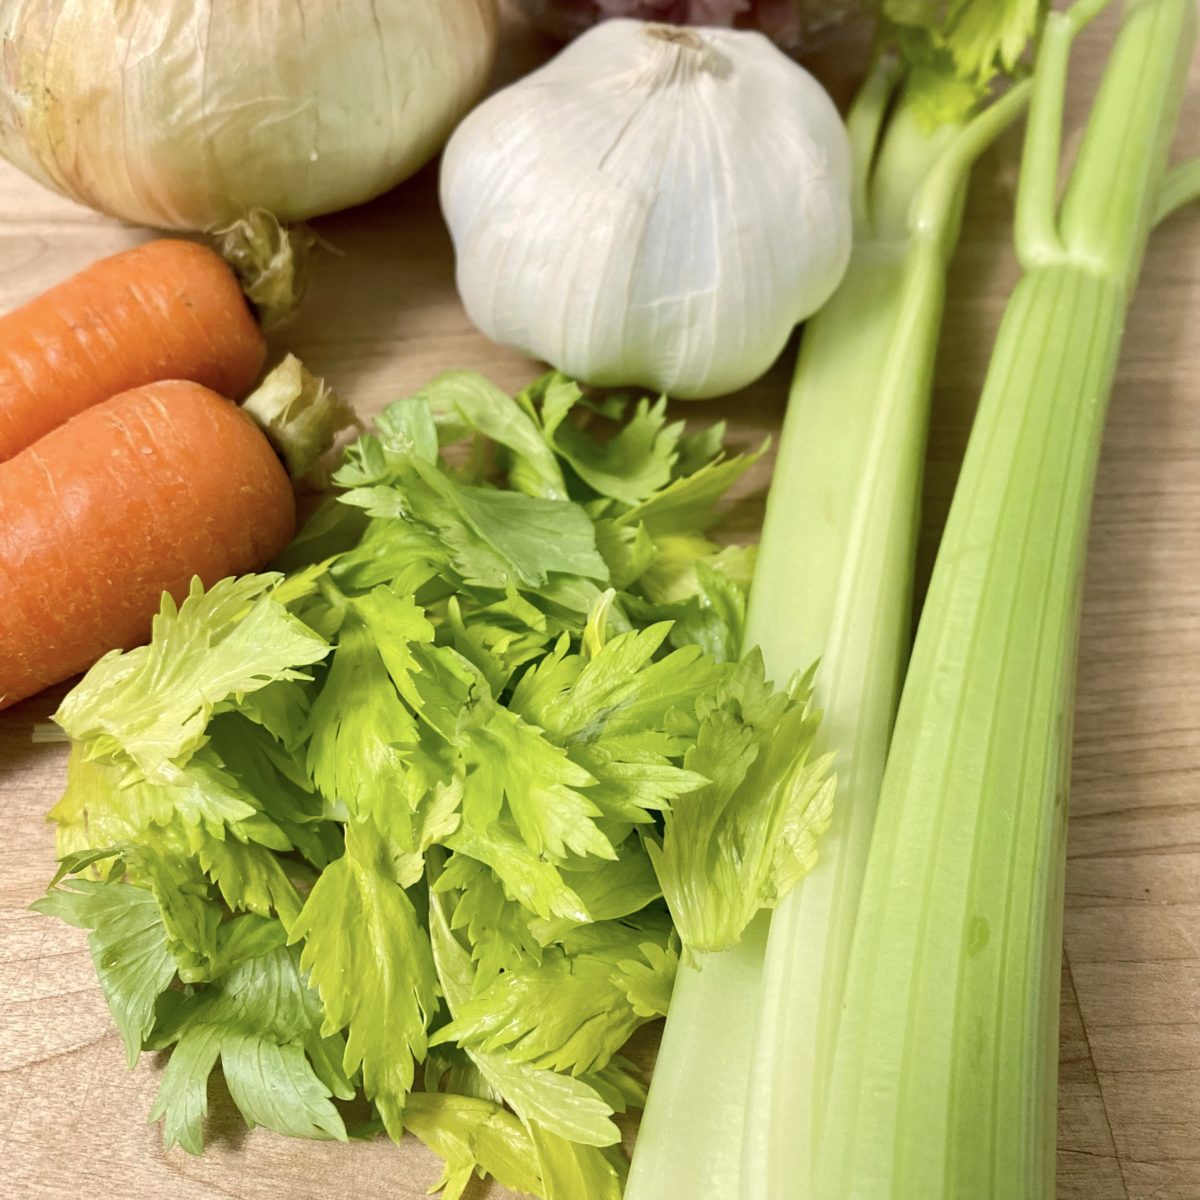 Carrots, garlic, onion and celery stalks on a cutting board with a big pile of celery leaves.